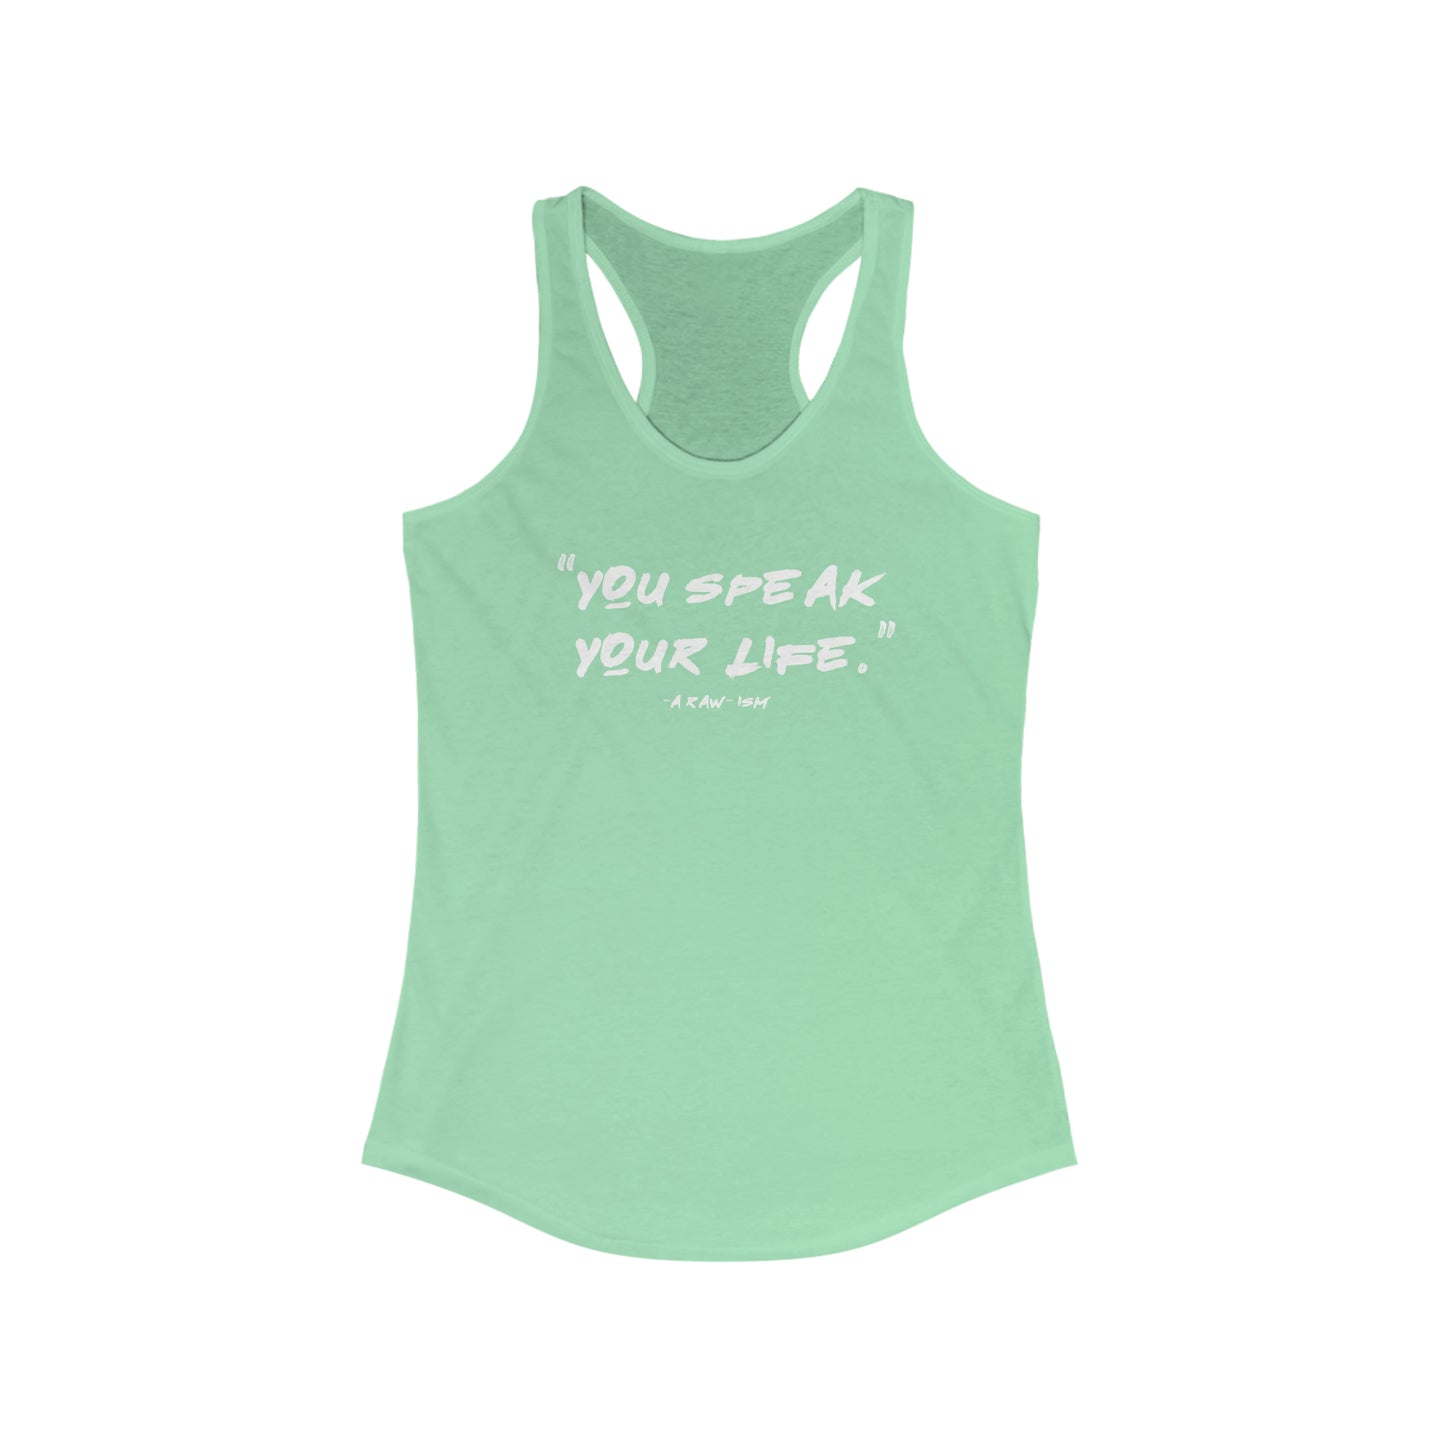 You Speak Your Life, A Raw-ism - Tank